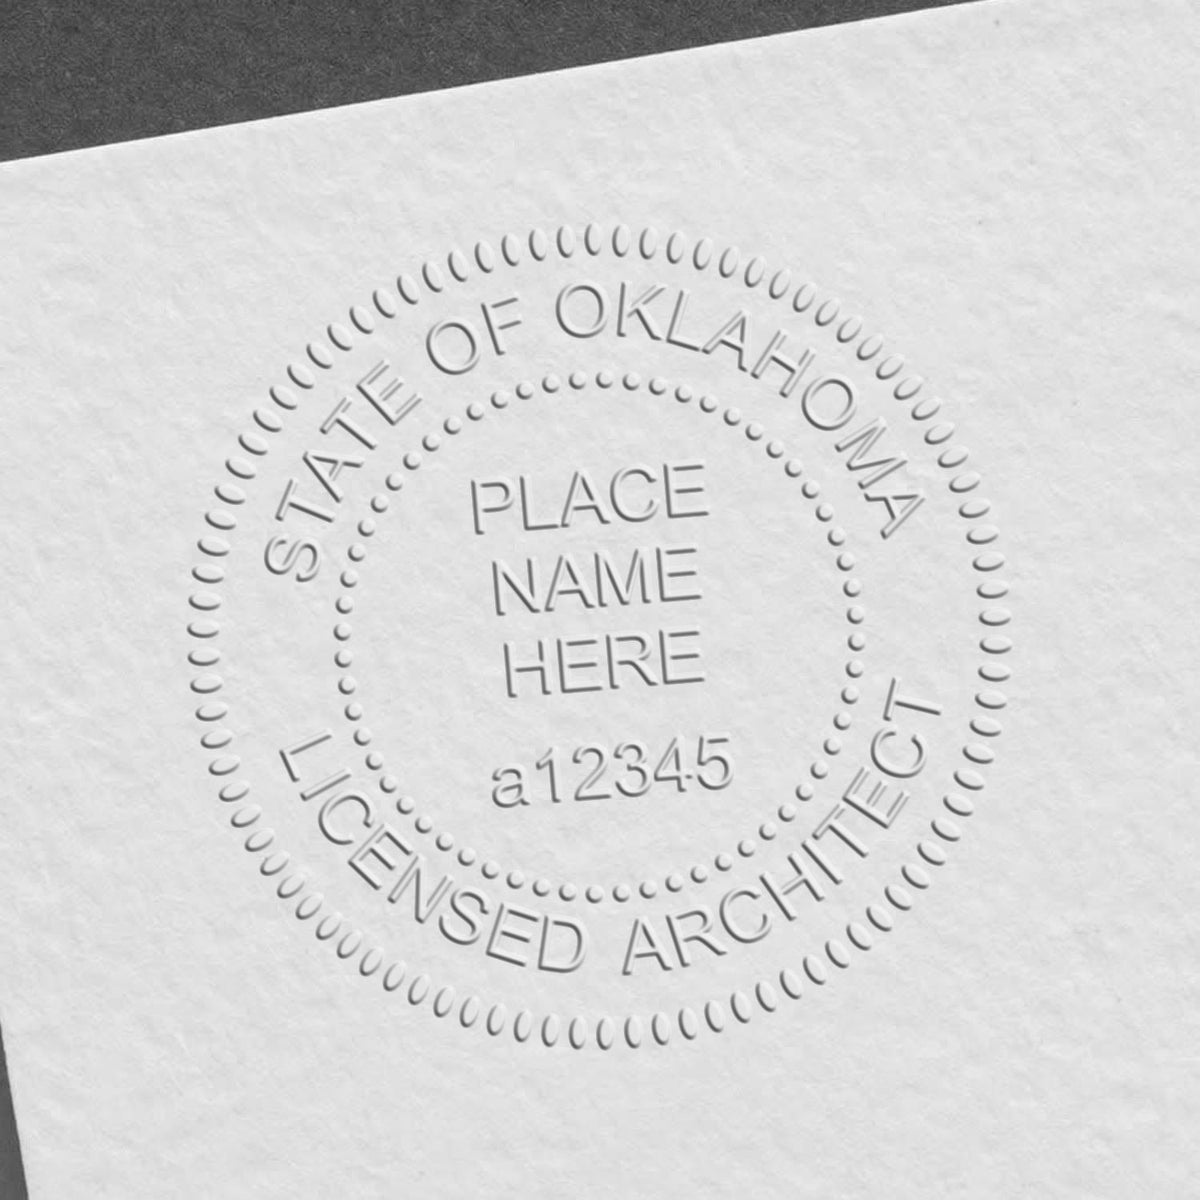 Another Example of a stamped impression of the Heavy Duty Cast Iron Oklahoma Architect Embosser on a piece of office paper.